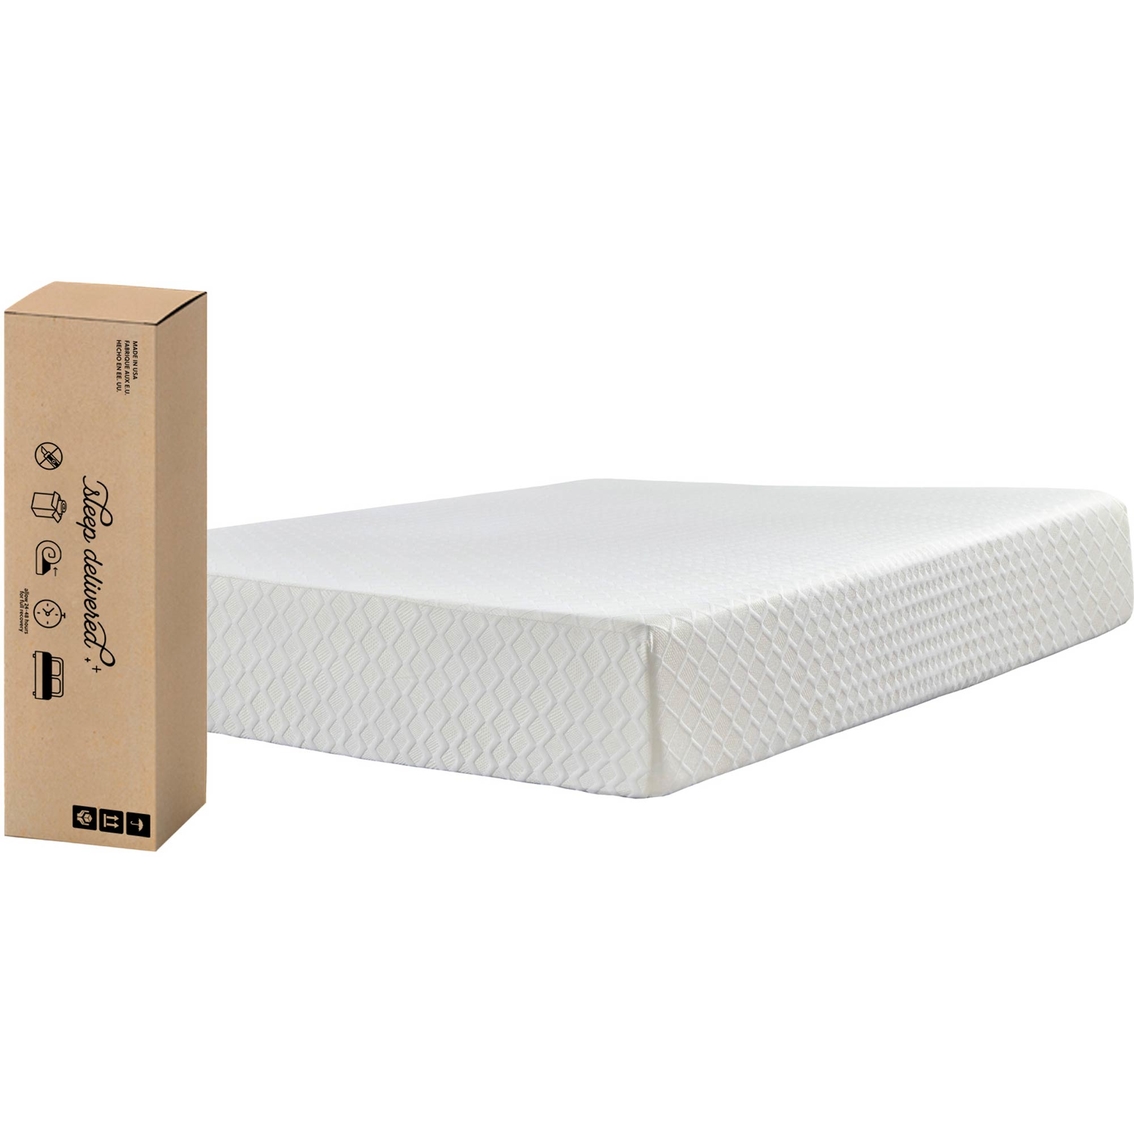 Ashley Chime Express 12 in. Mattress - Image 3 of 4